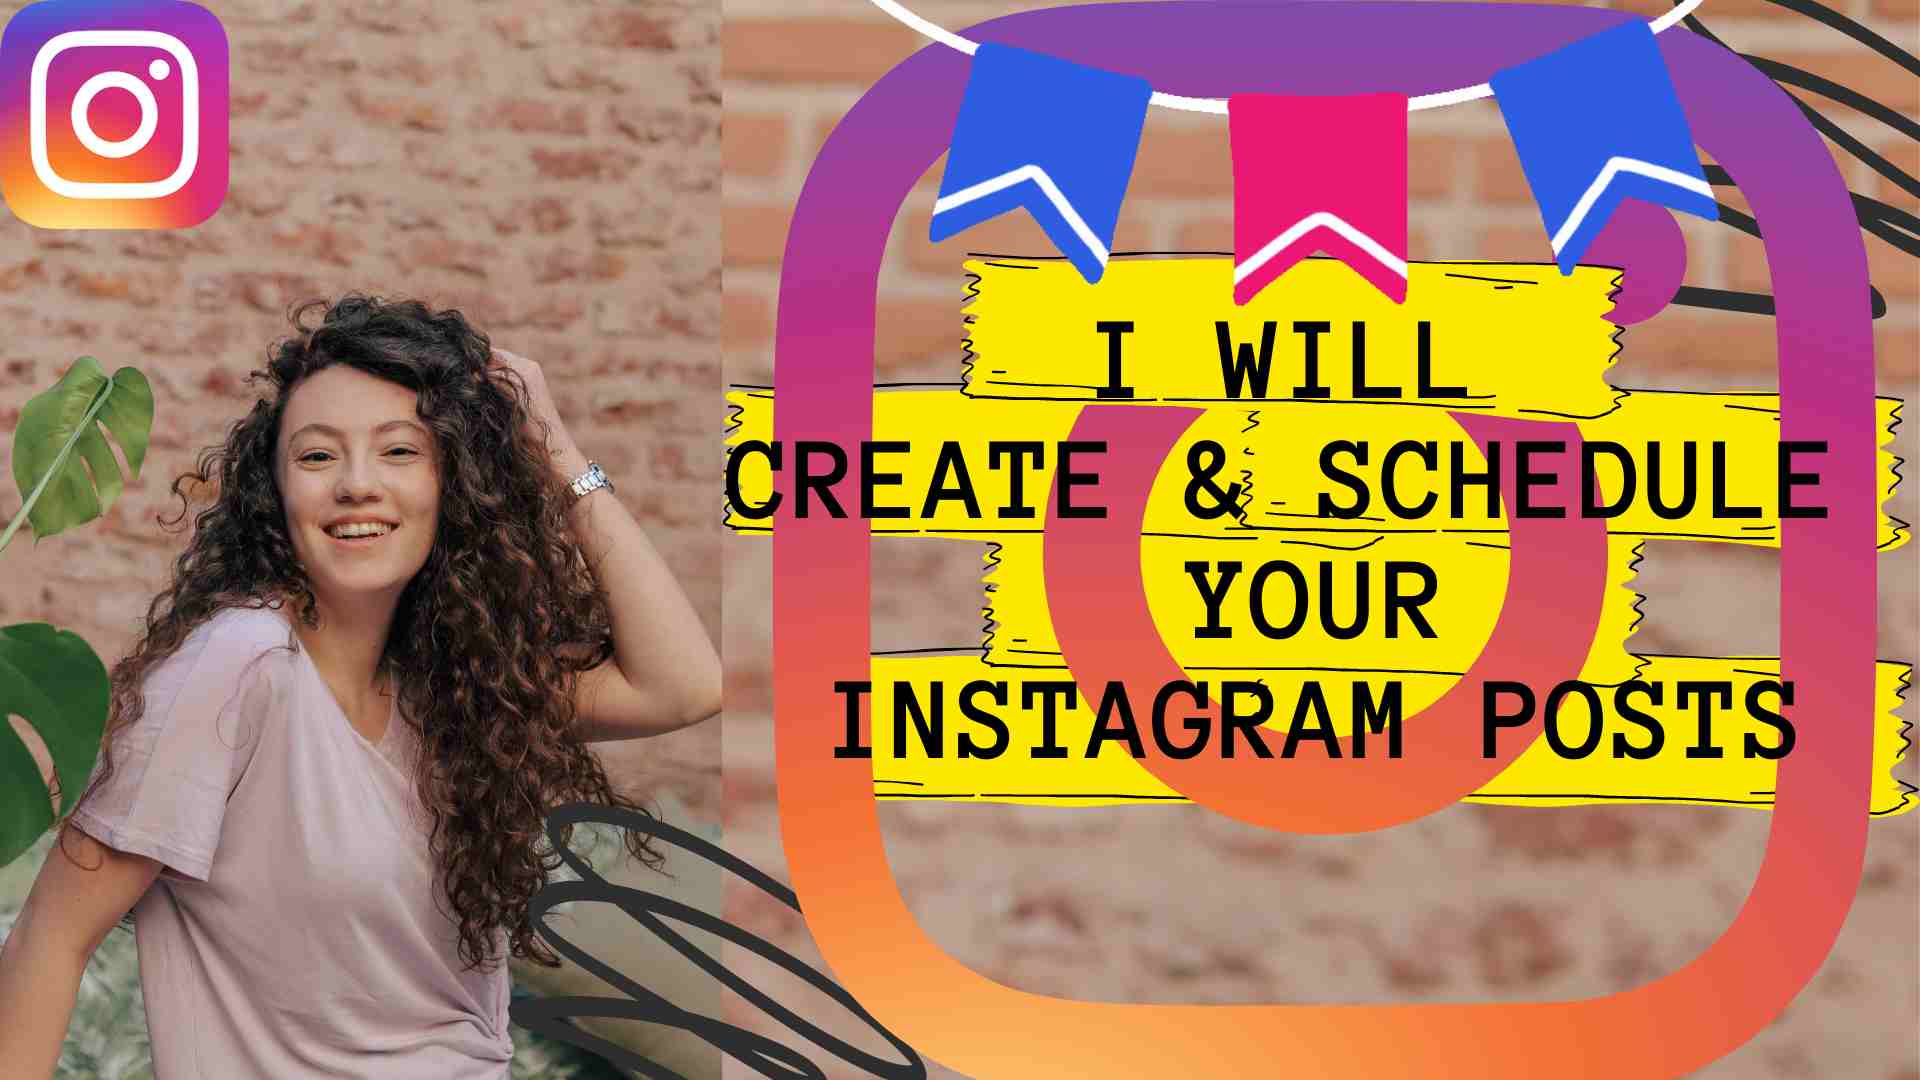 I will create and schedule your Instagram posts